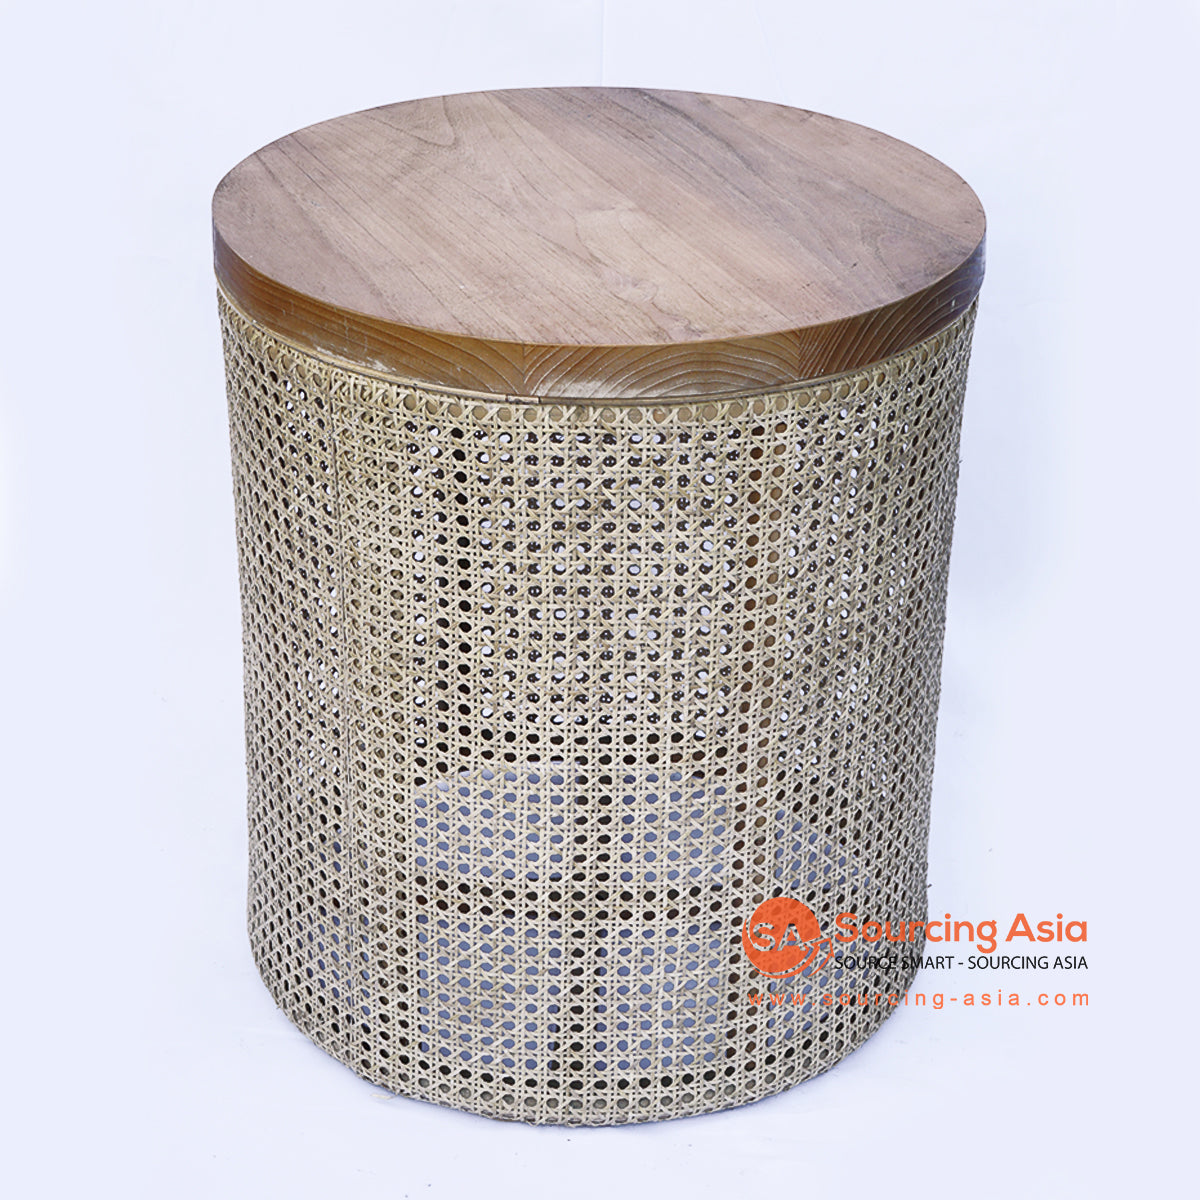 BNTC006-3 NATURAL WOVEN RATTAN SIDE TABLE WITH WOODEN TOP